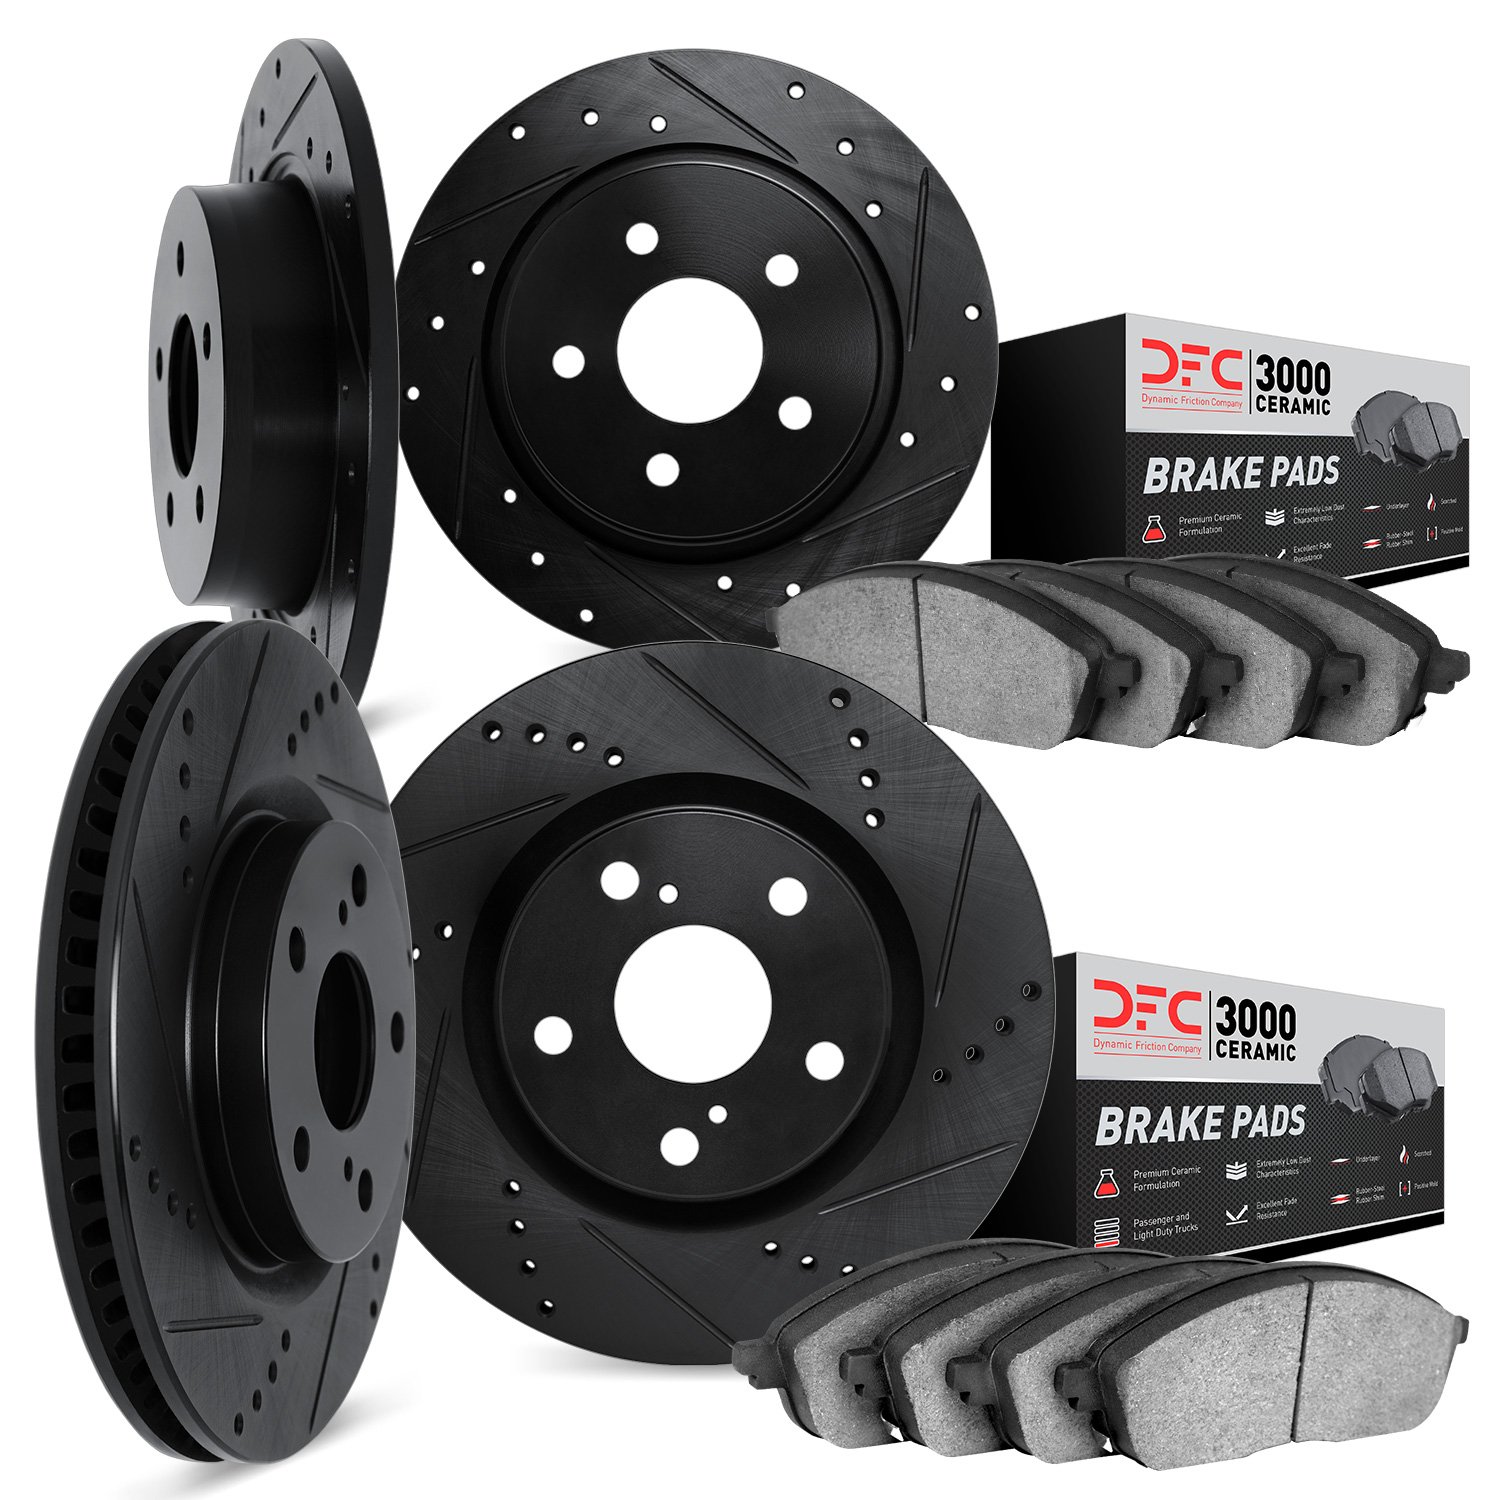 8304-39005 Drilled/Slotted Brake Rotors with 3000-Series Ceramic Brake Pads Kit [Black], 1995-2000 Mopar, Position: Front and Re